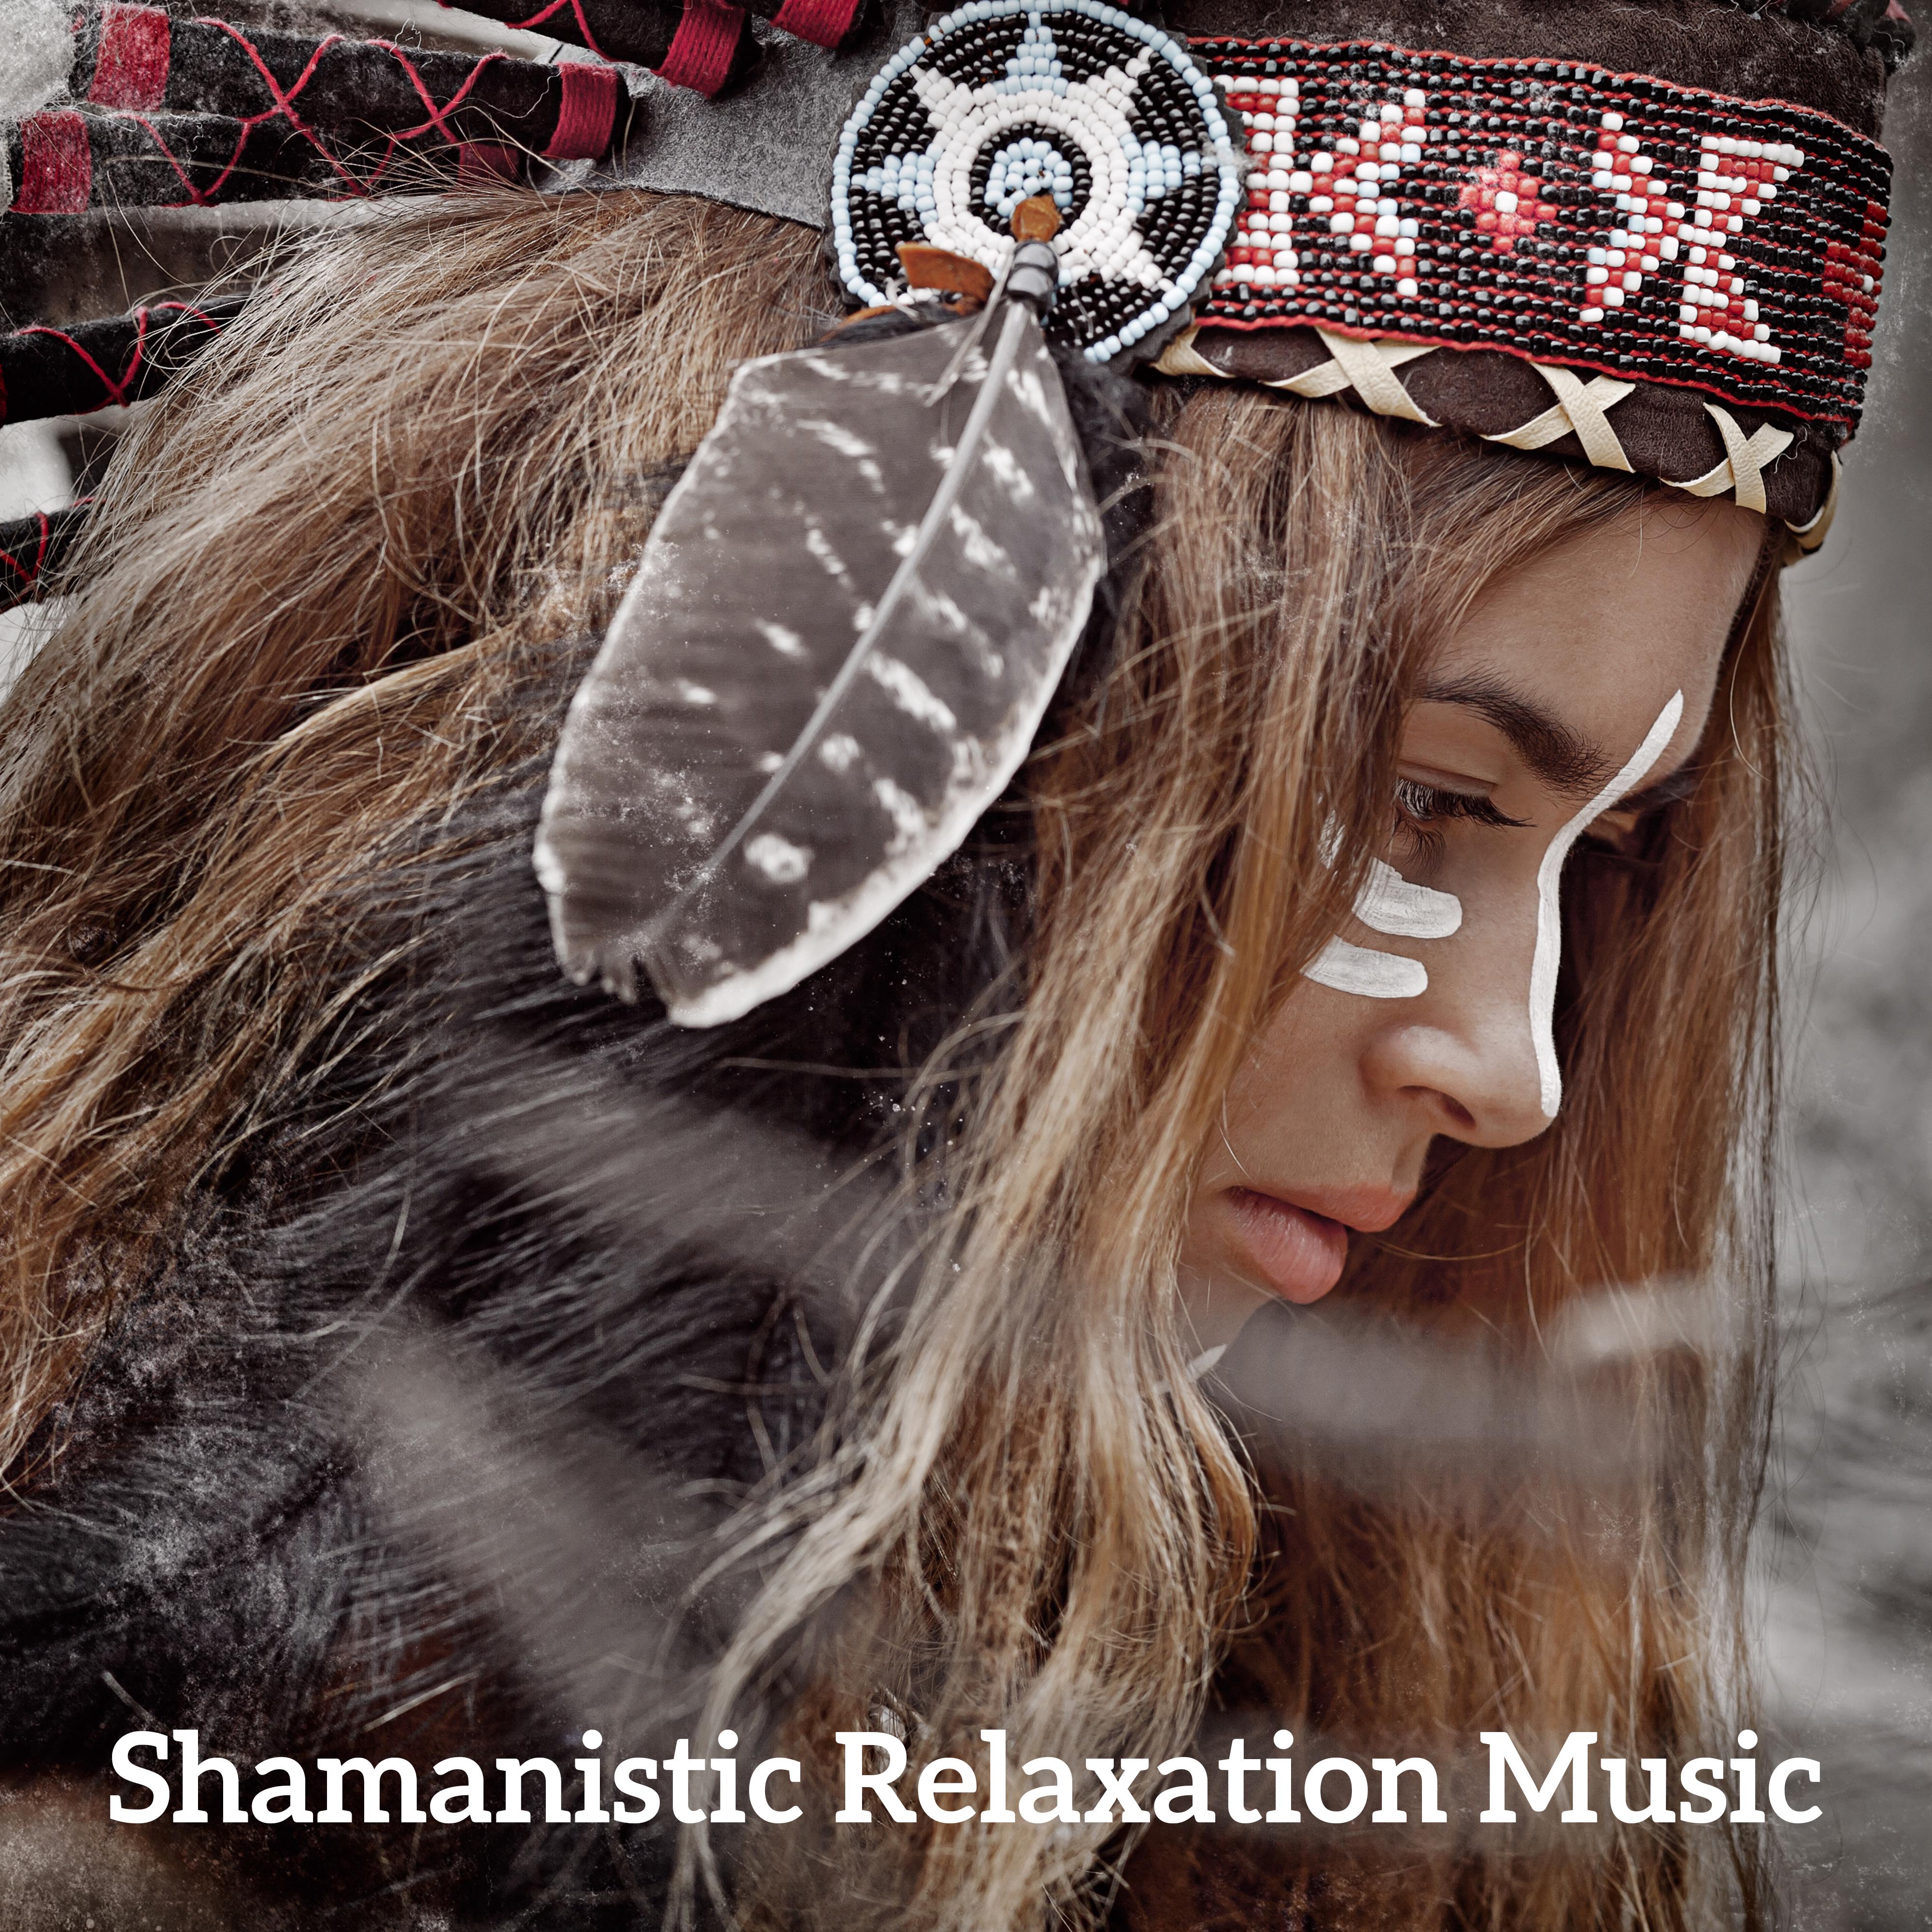 Shamanistic Relaxation Music: 15 Songs That' ll Help You Relax, Meditate, Calm Down, Rest and Chill Out